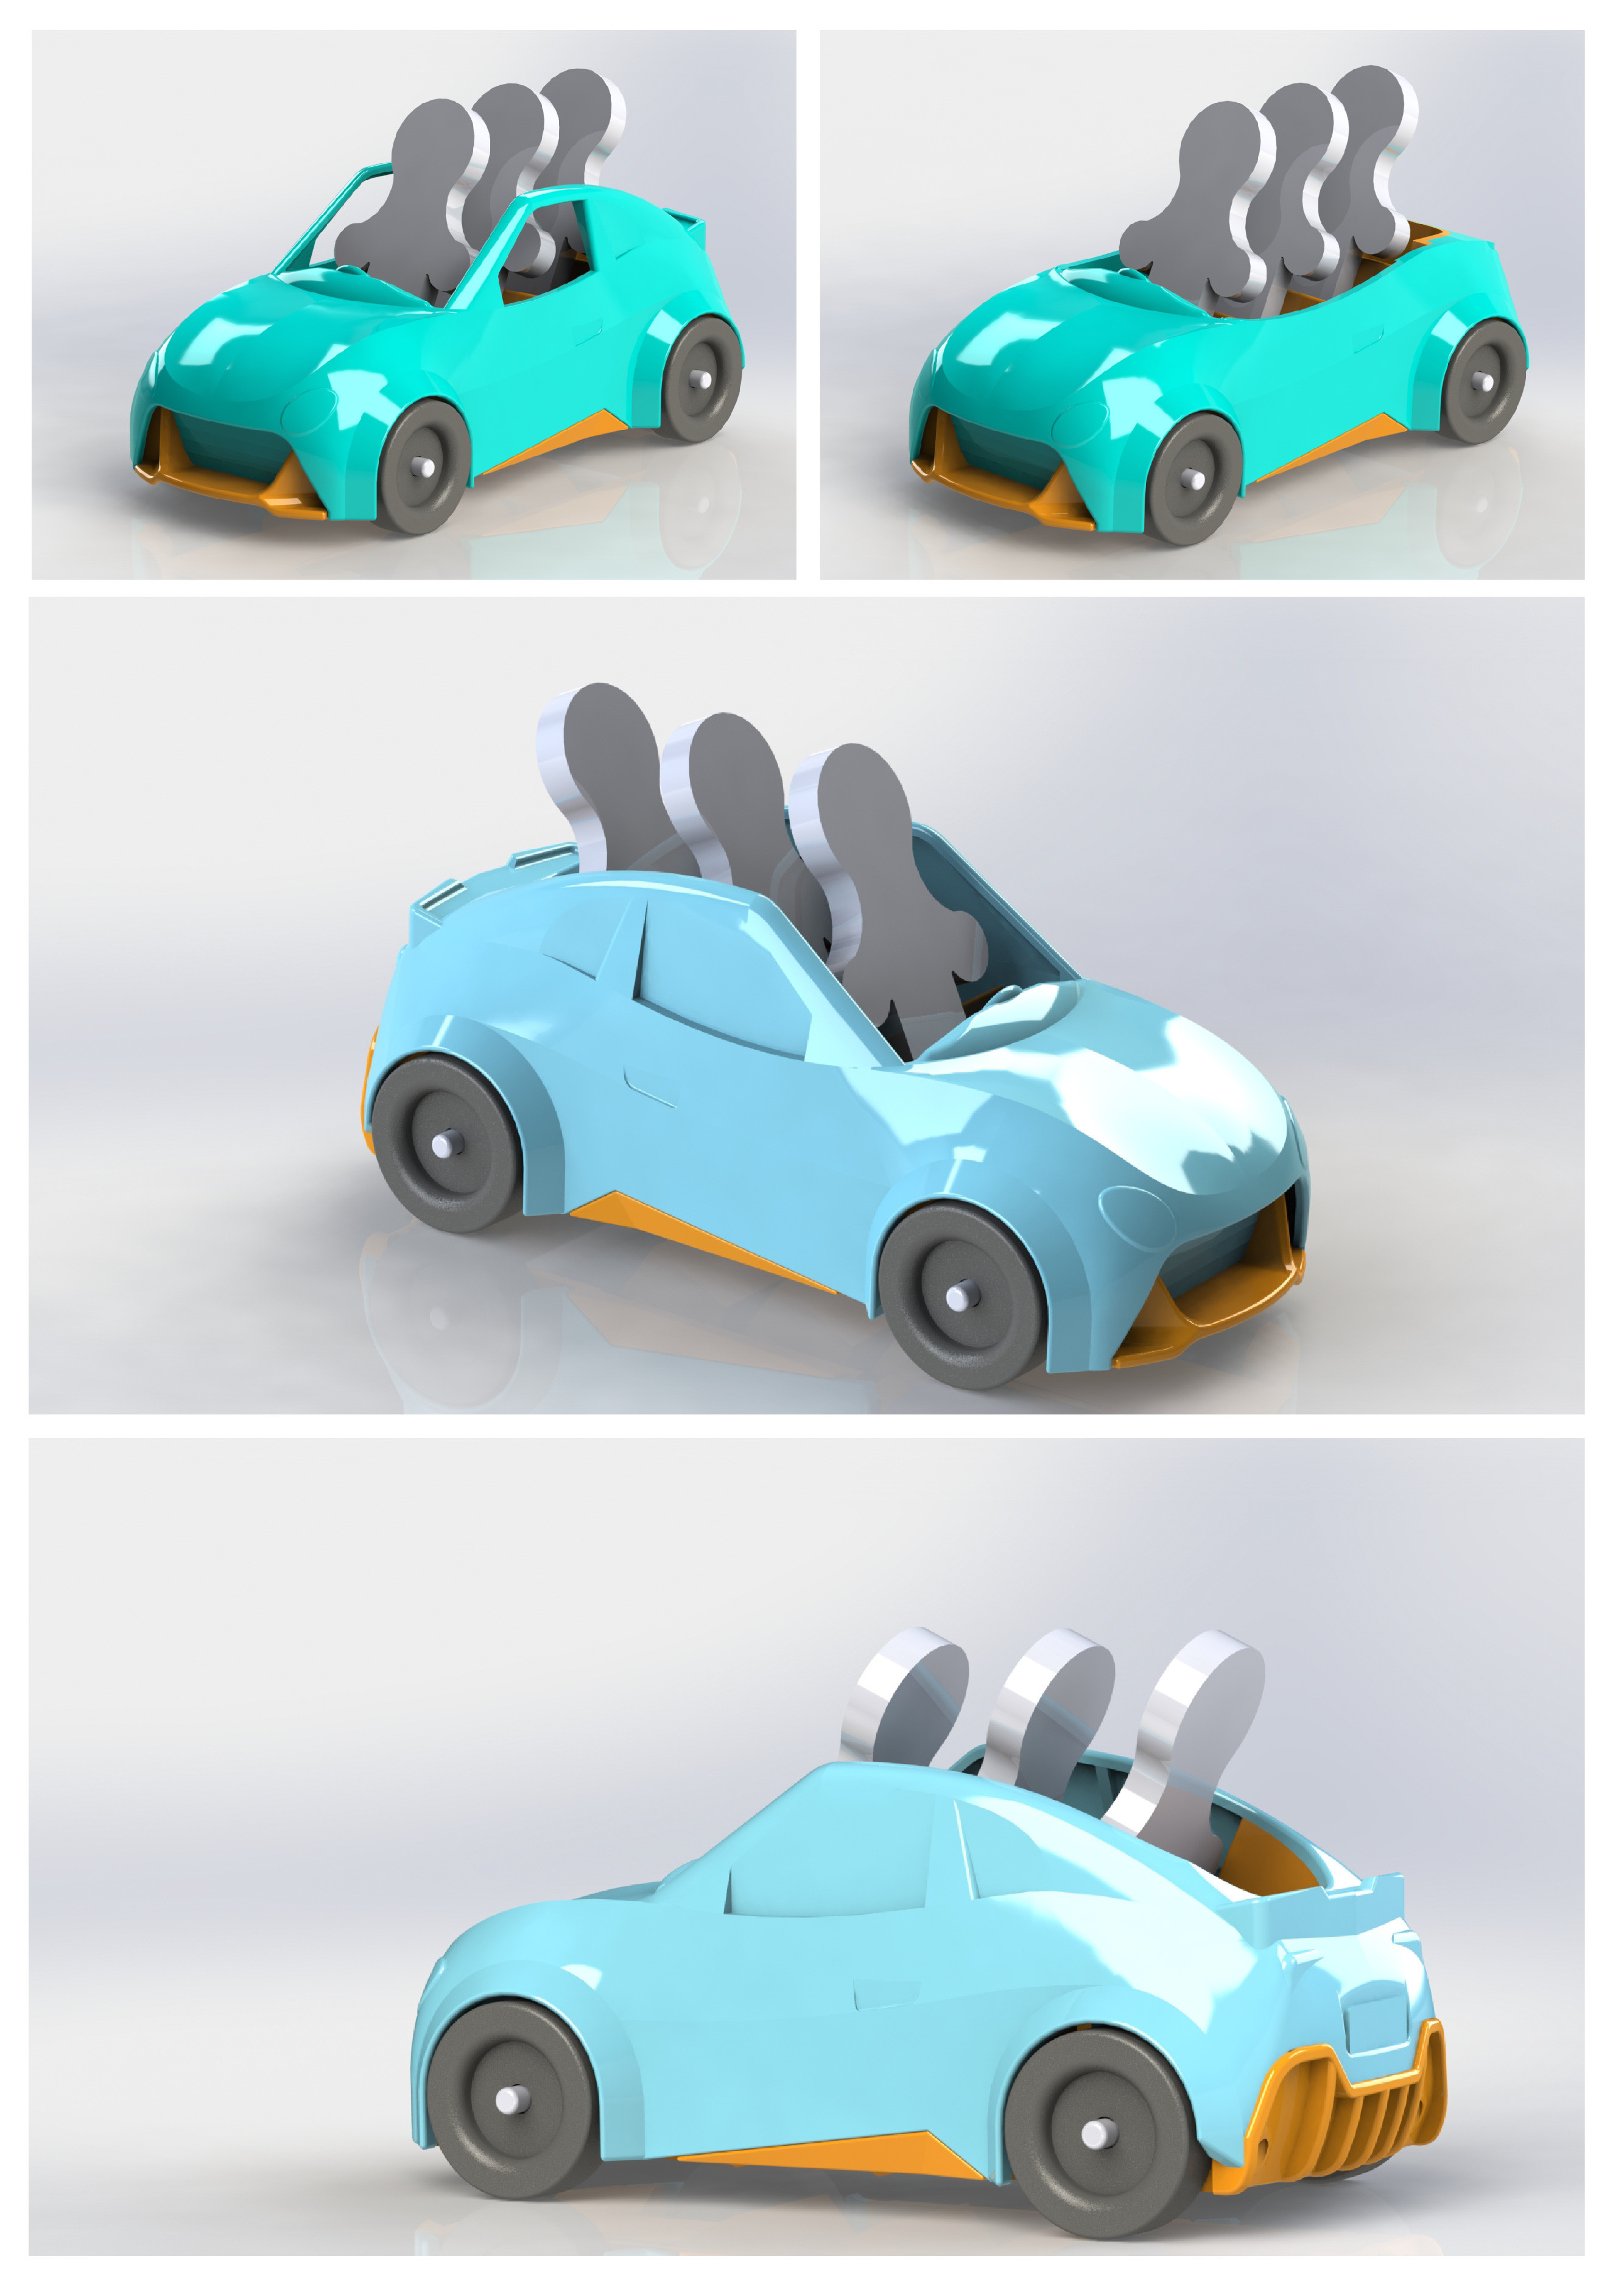 Solidworks renderings of the sports car in open-window, roofless, and the final closed-window iteration.